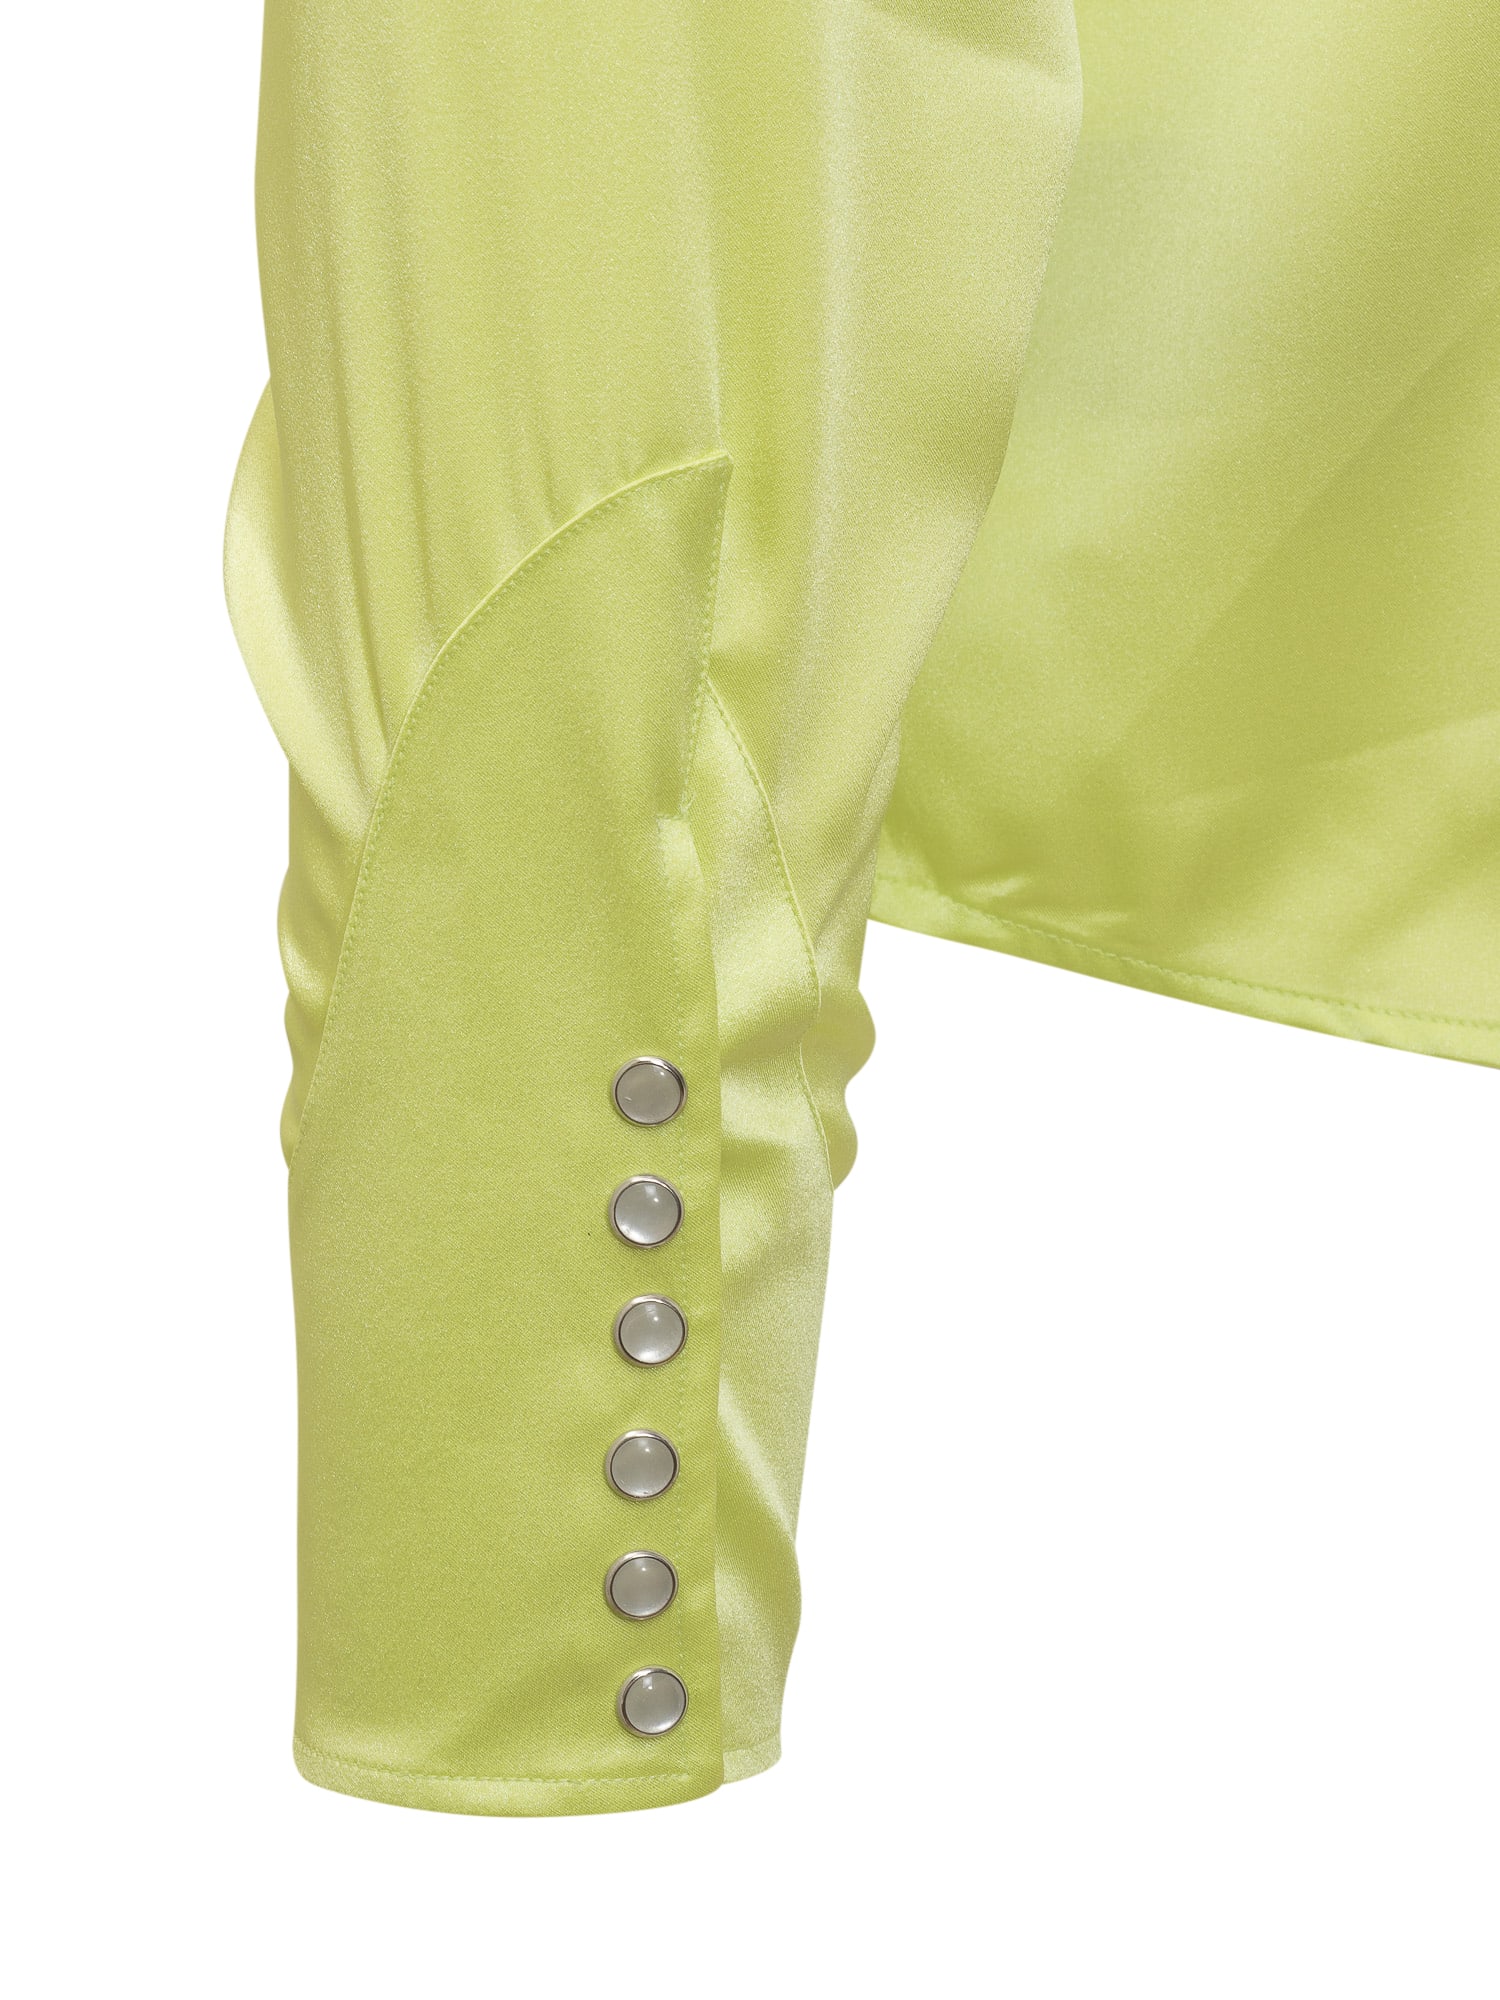 Shop Bluemarble Shirt With Embroidery In Lime